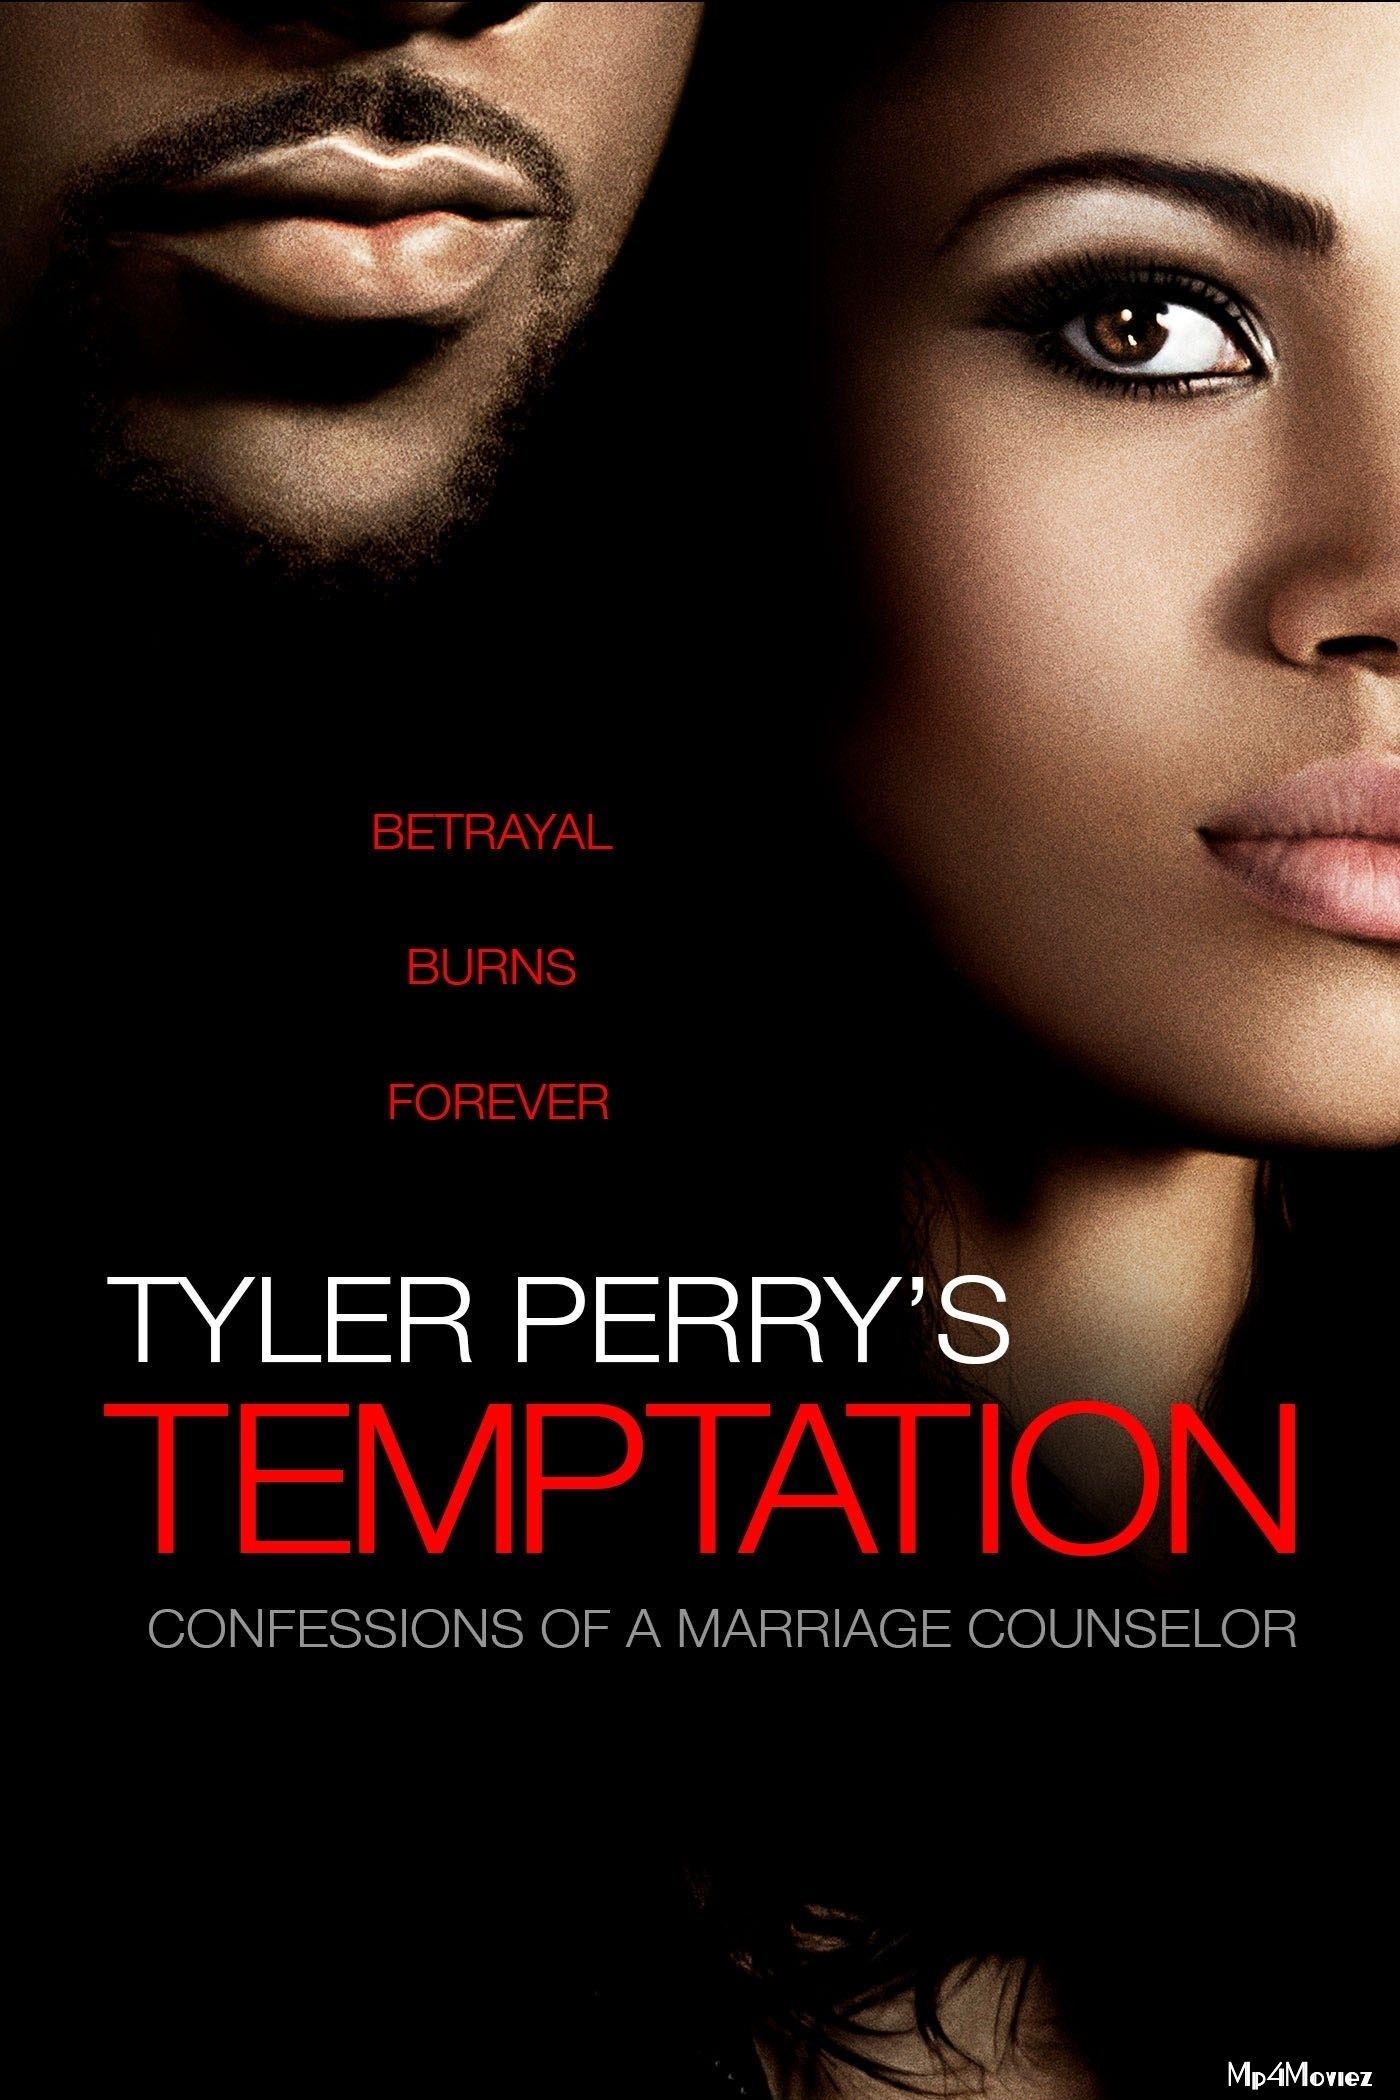 Temptation: Confessions of a Marriage Counselor 2013 Hindi Dubbed Full Movie download full movie